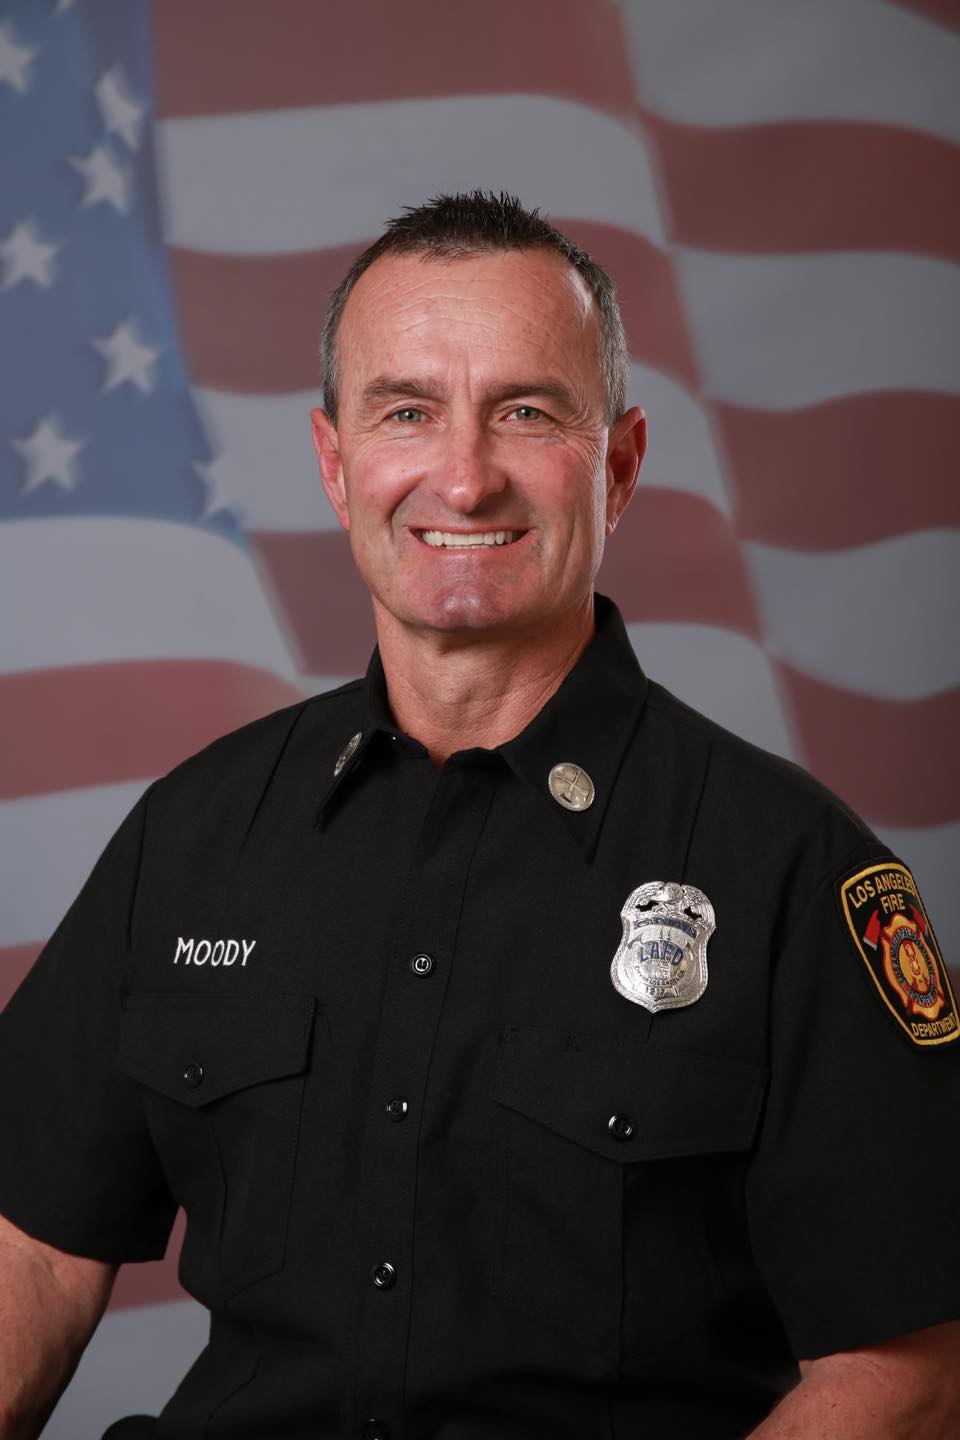 Formal Los Angeles Fire Department Portrait Photograph of LAFD Captain Richard Moody, smiling in his work uniform with badge, with a U.S. Flag motif in the background